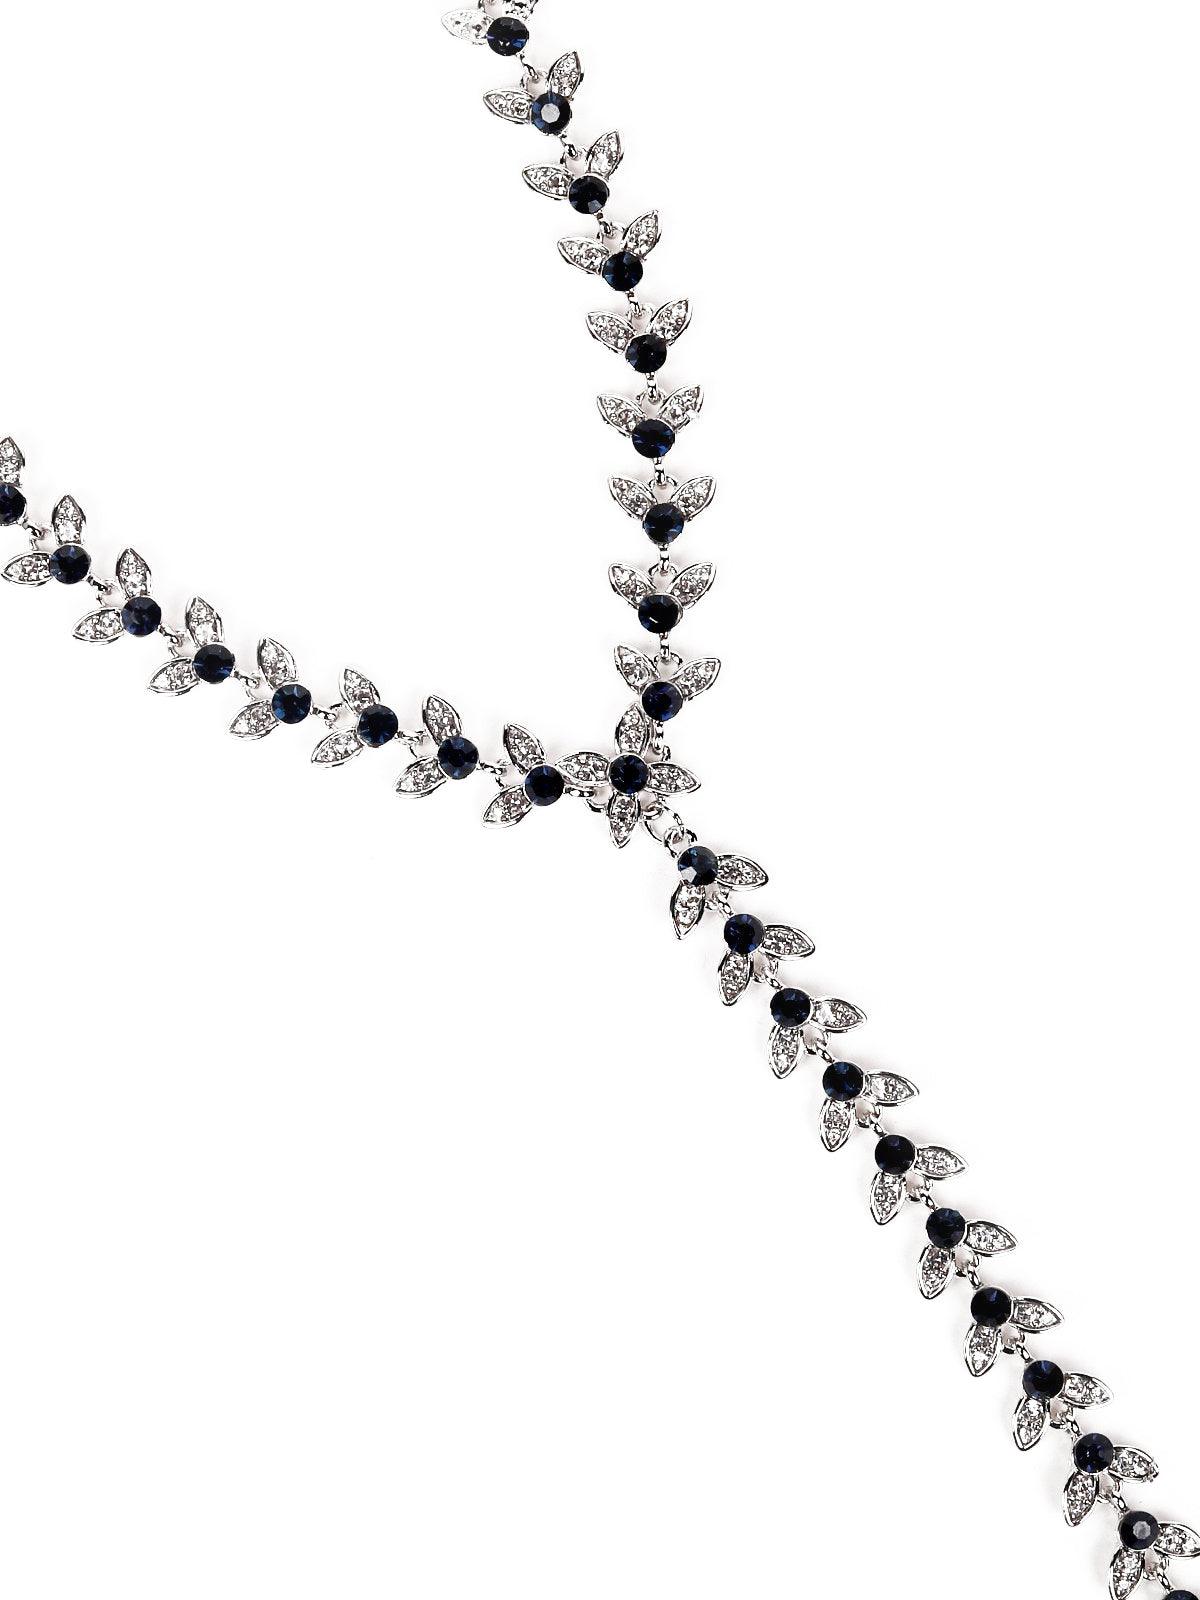 Women's Black Beads With Crystal Embellishments Lariat Necklace - Odette